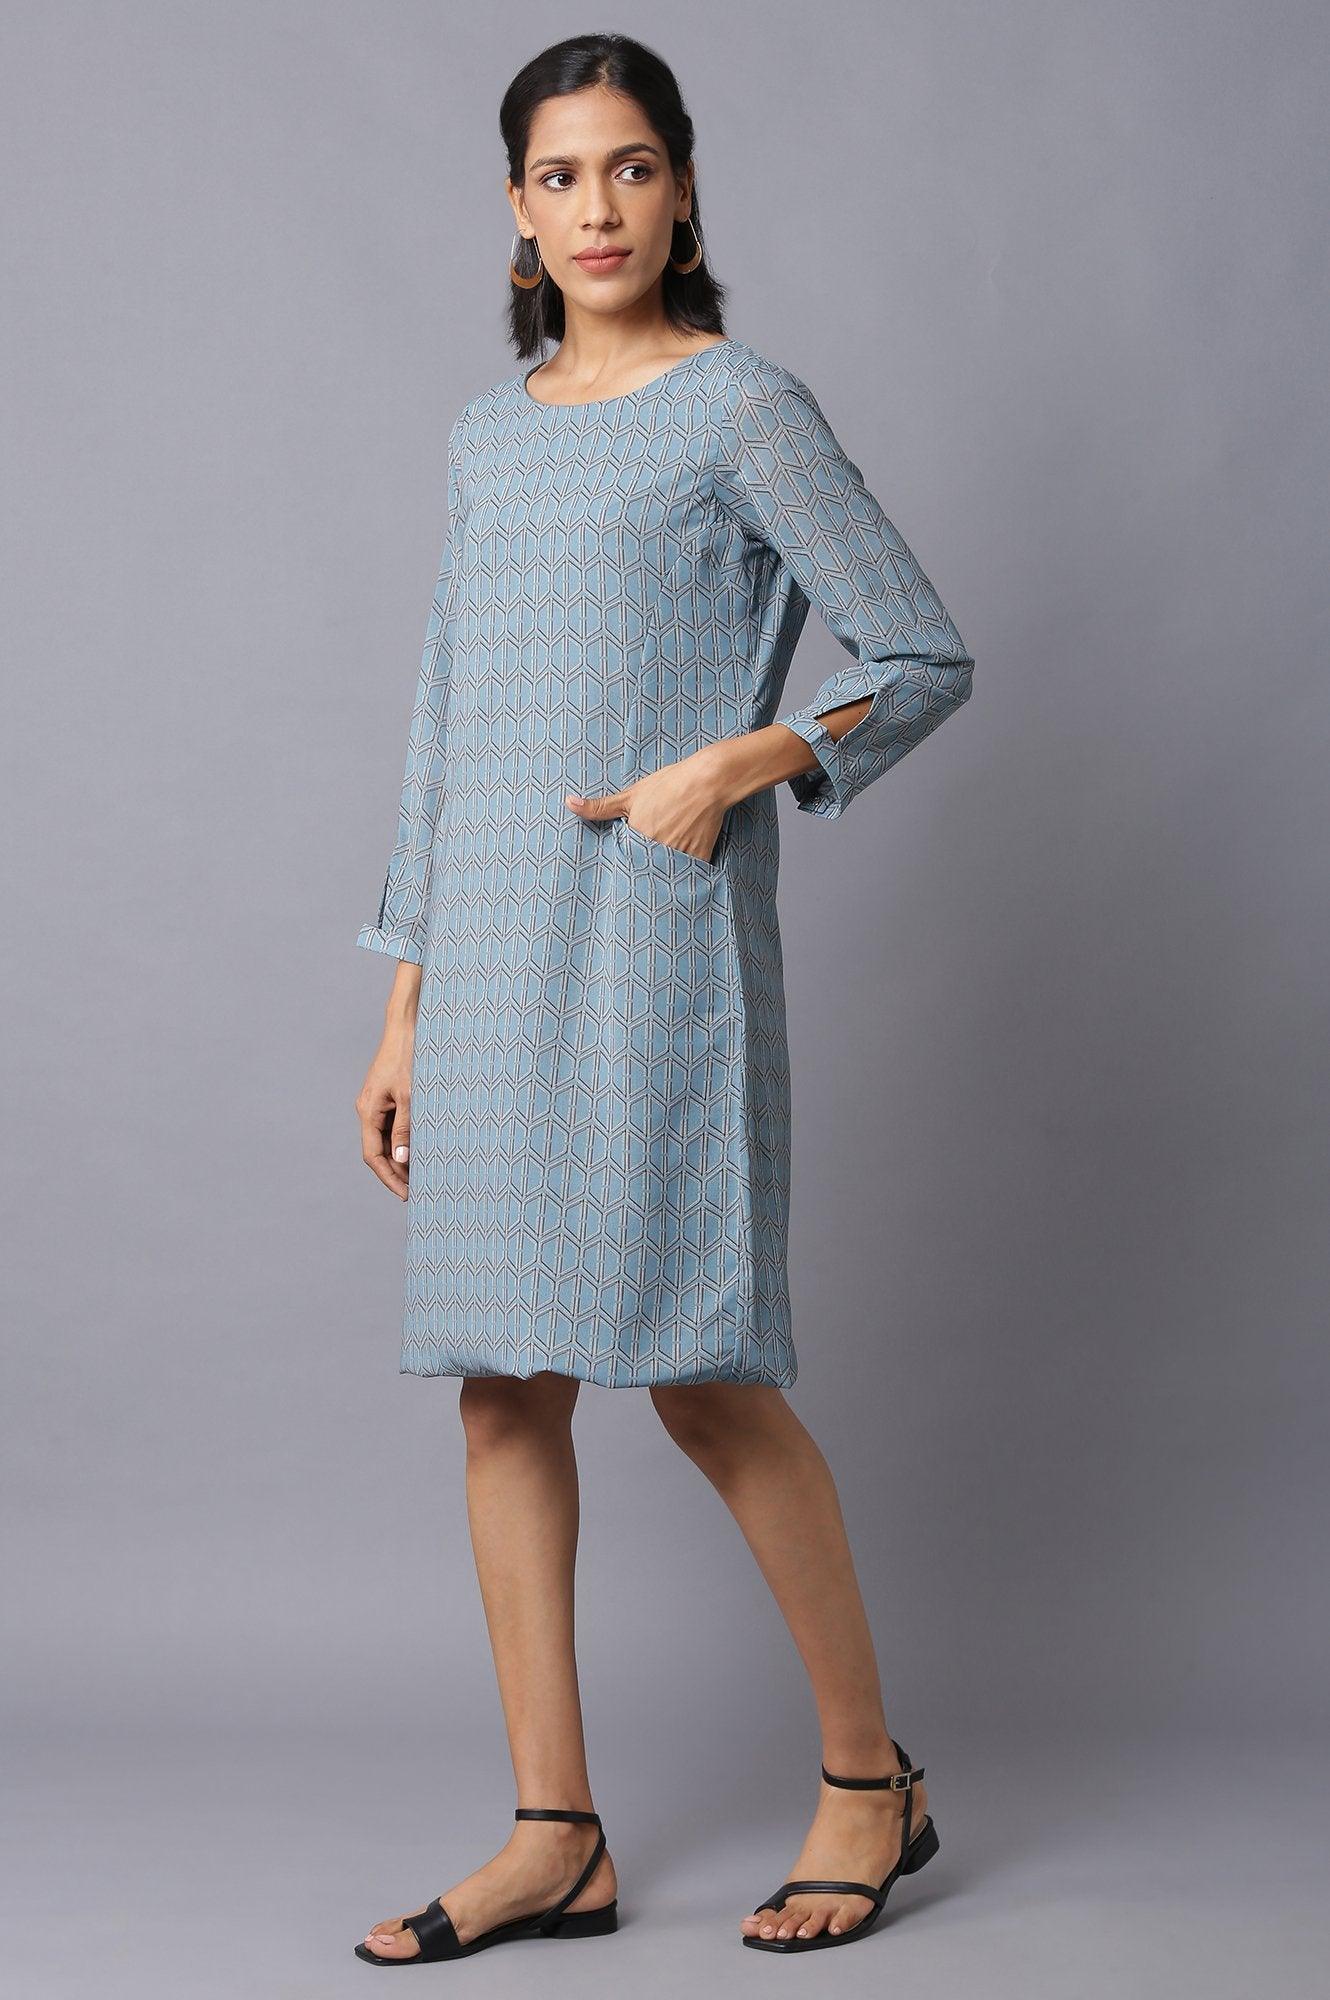 Light Teal Georgette Printed Dress With Cut Out Sleeves - wforwoman